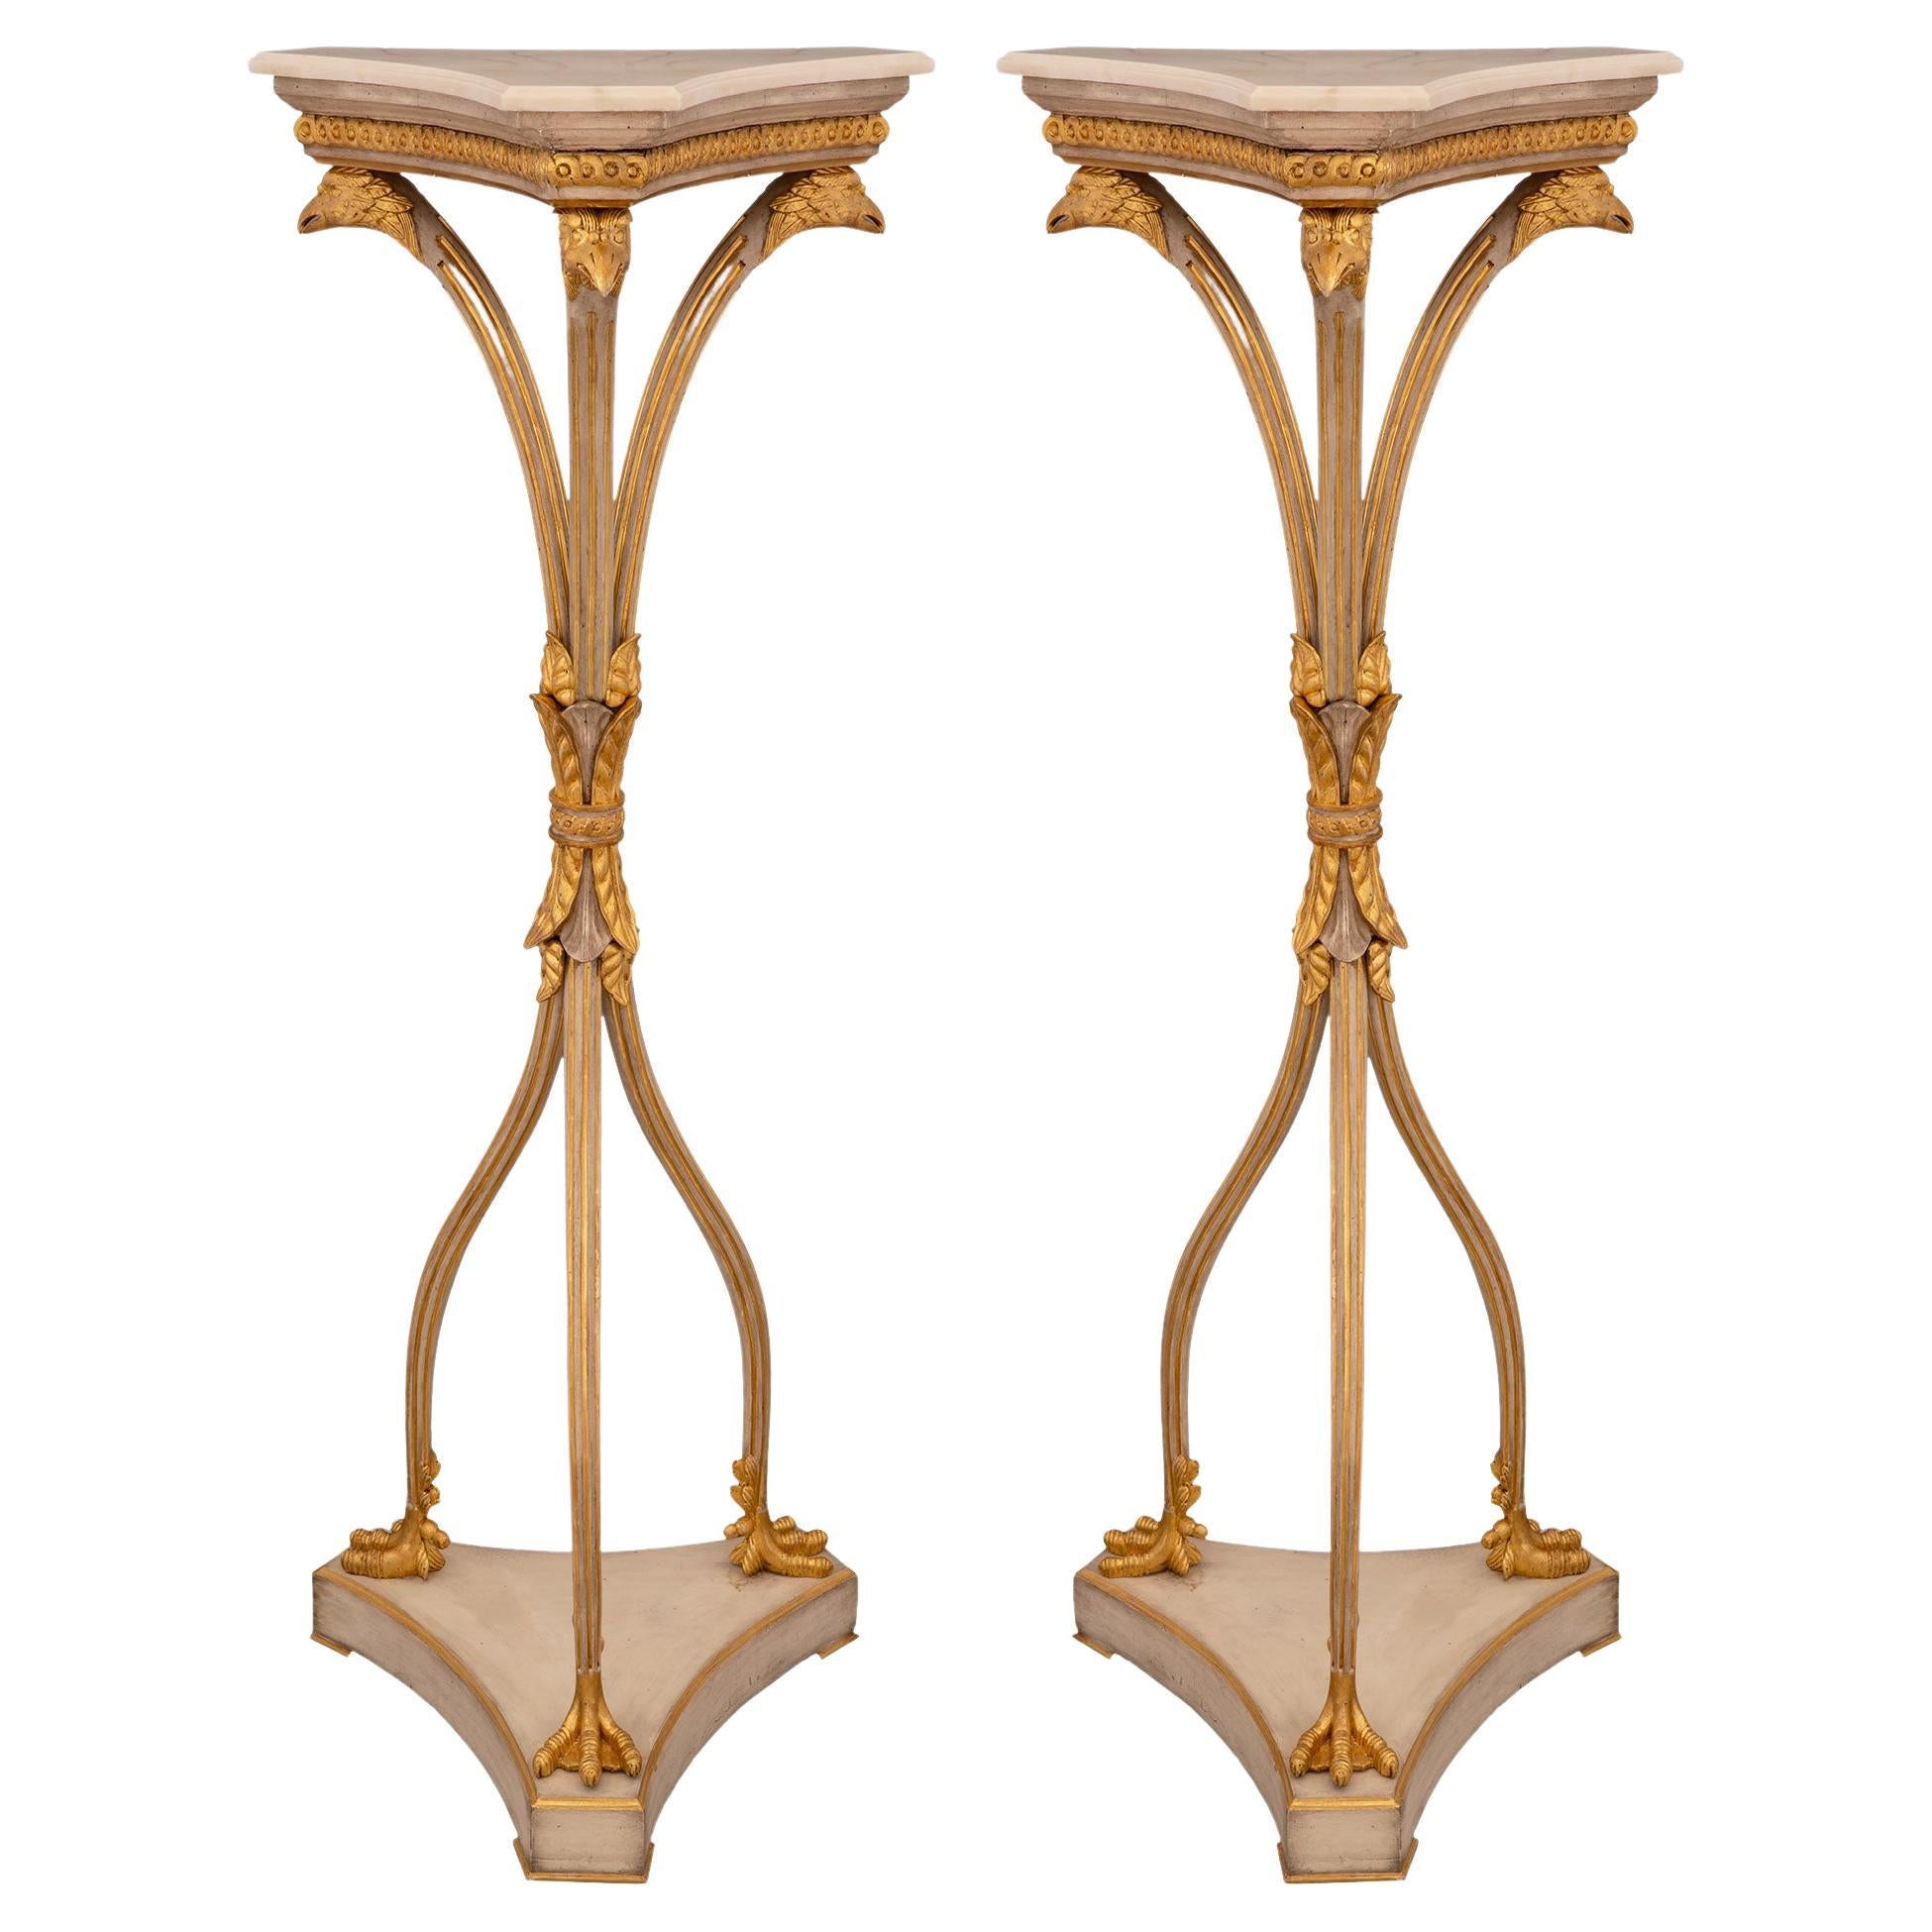 Pair of Italian 19th Century Neoclassical Style Giltwood and Alabaster Pedestals For Sale